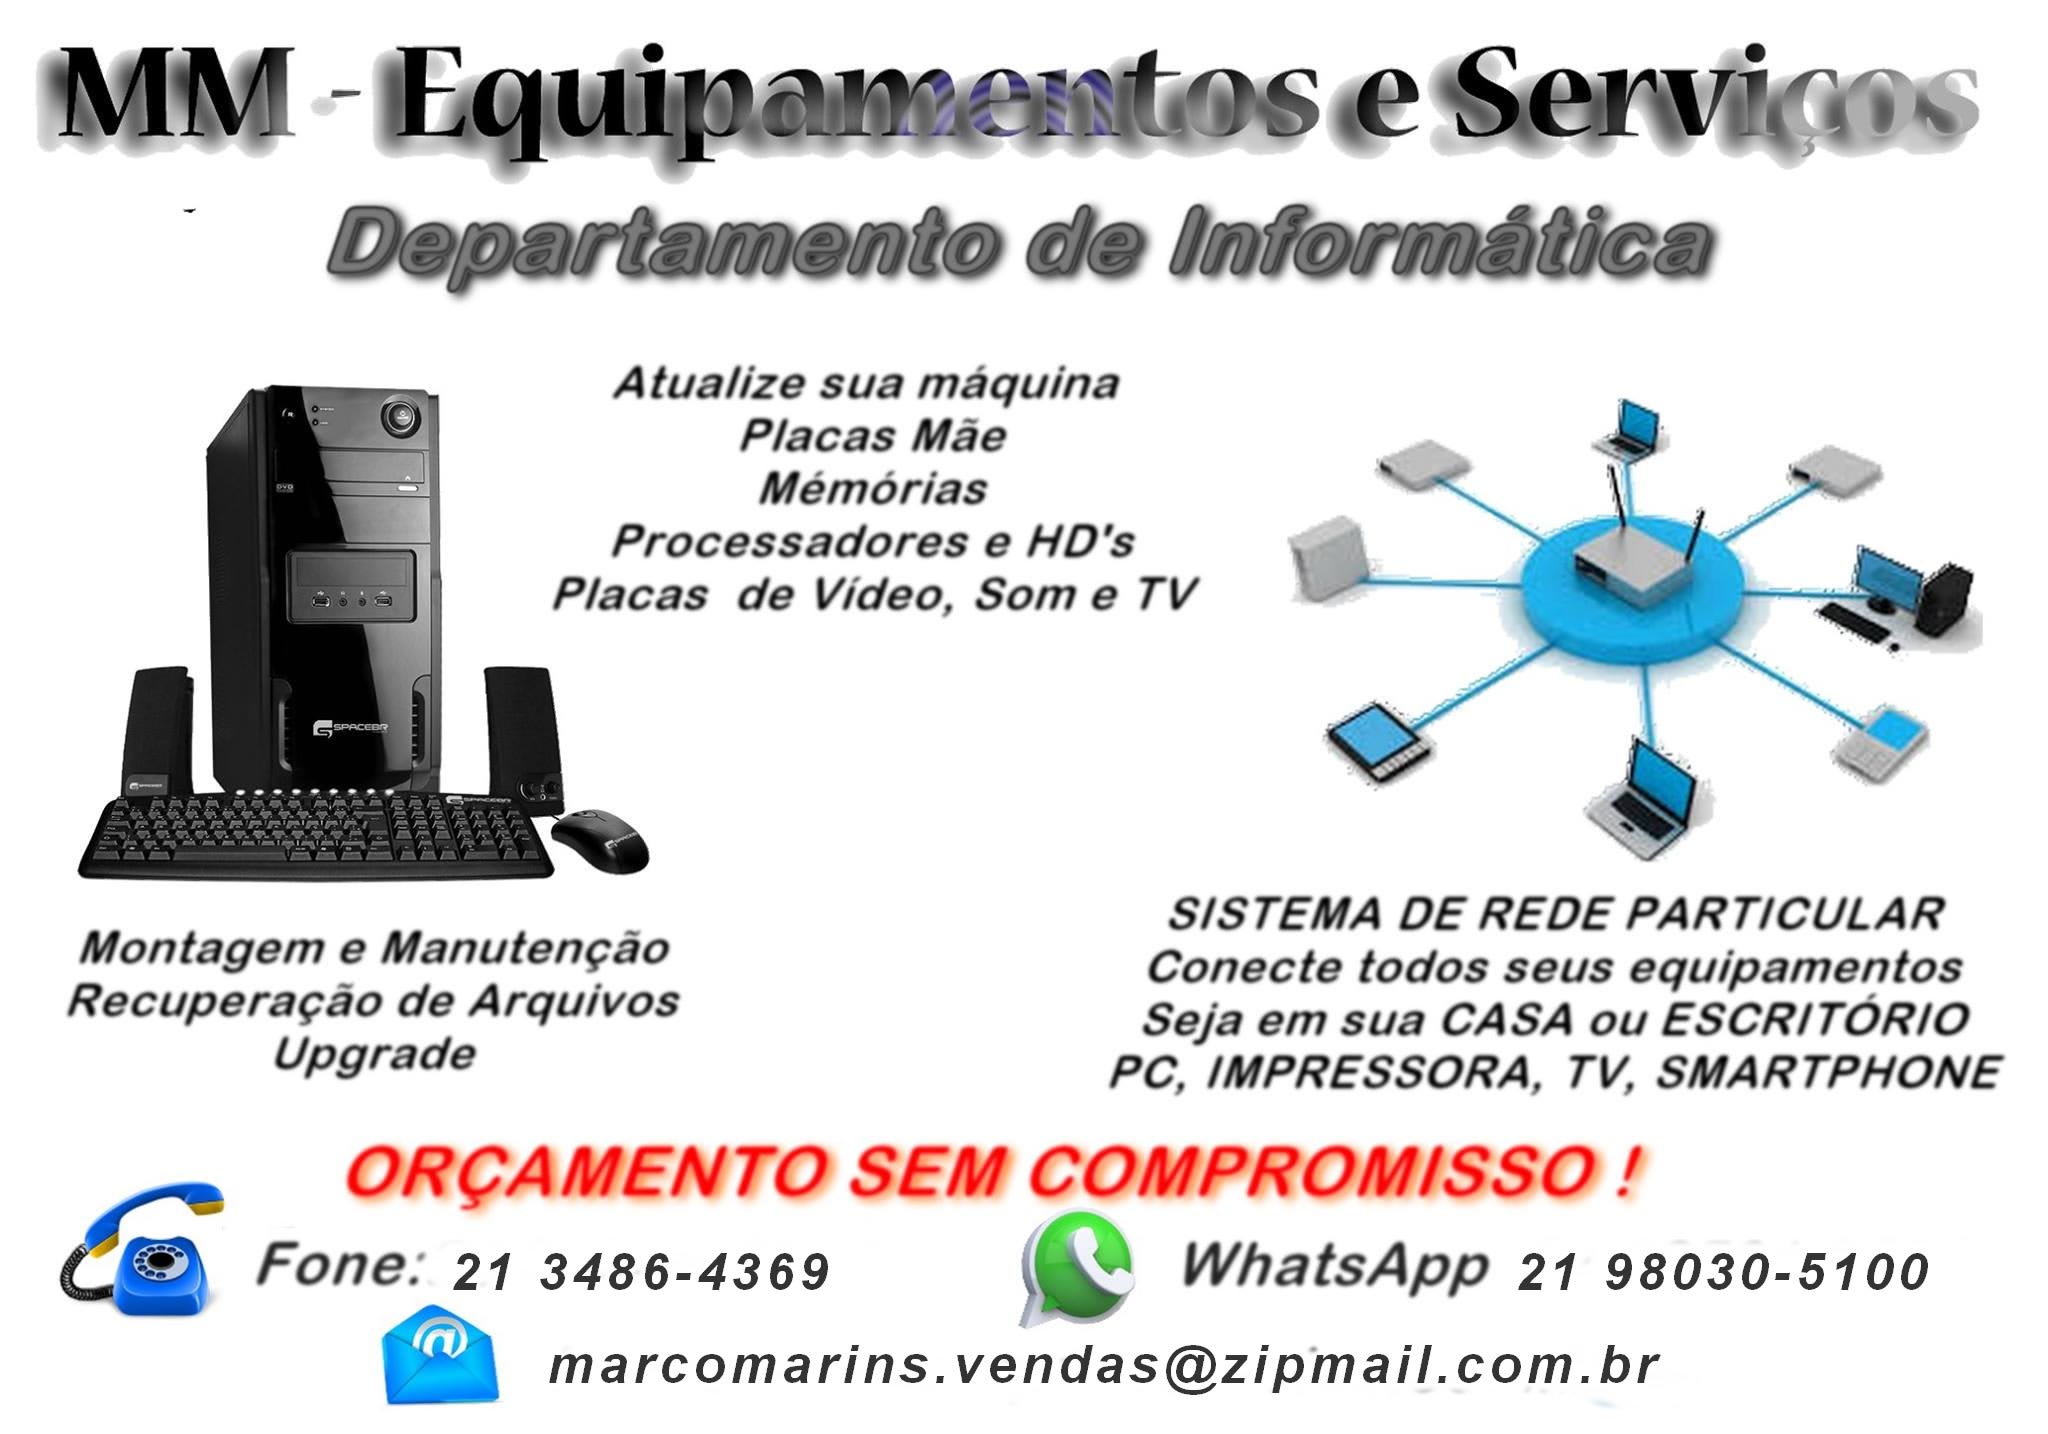 MM Equipo Service